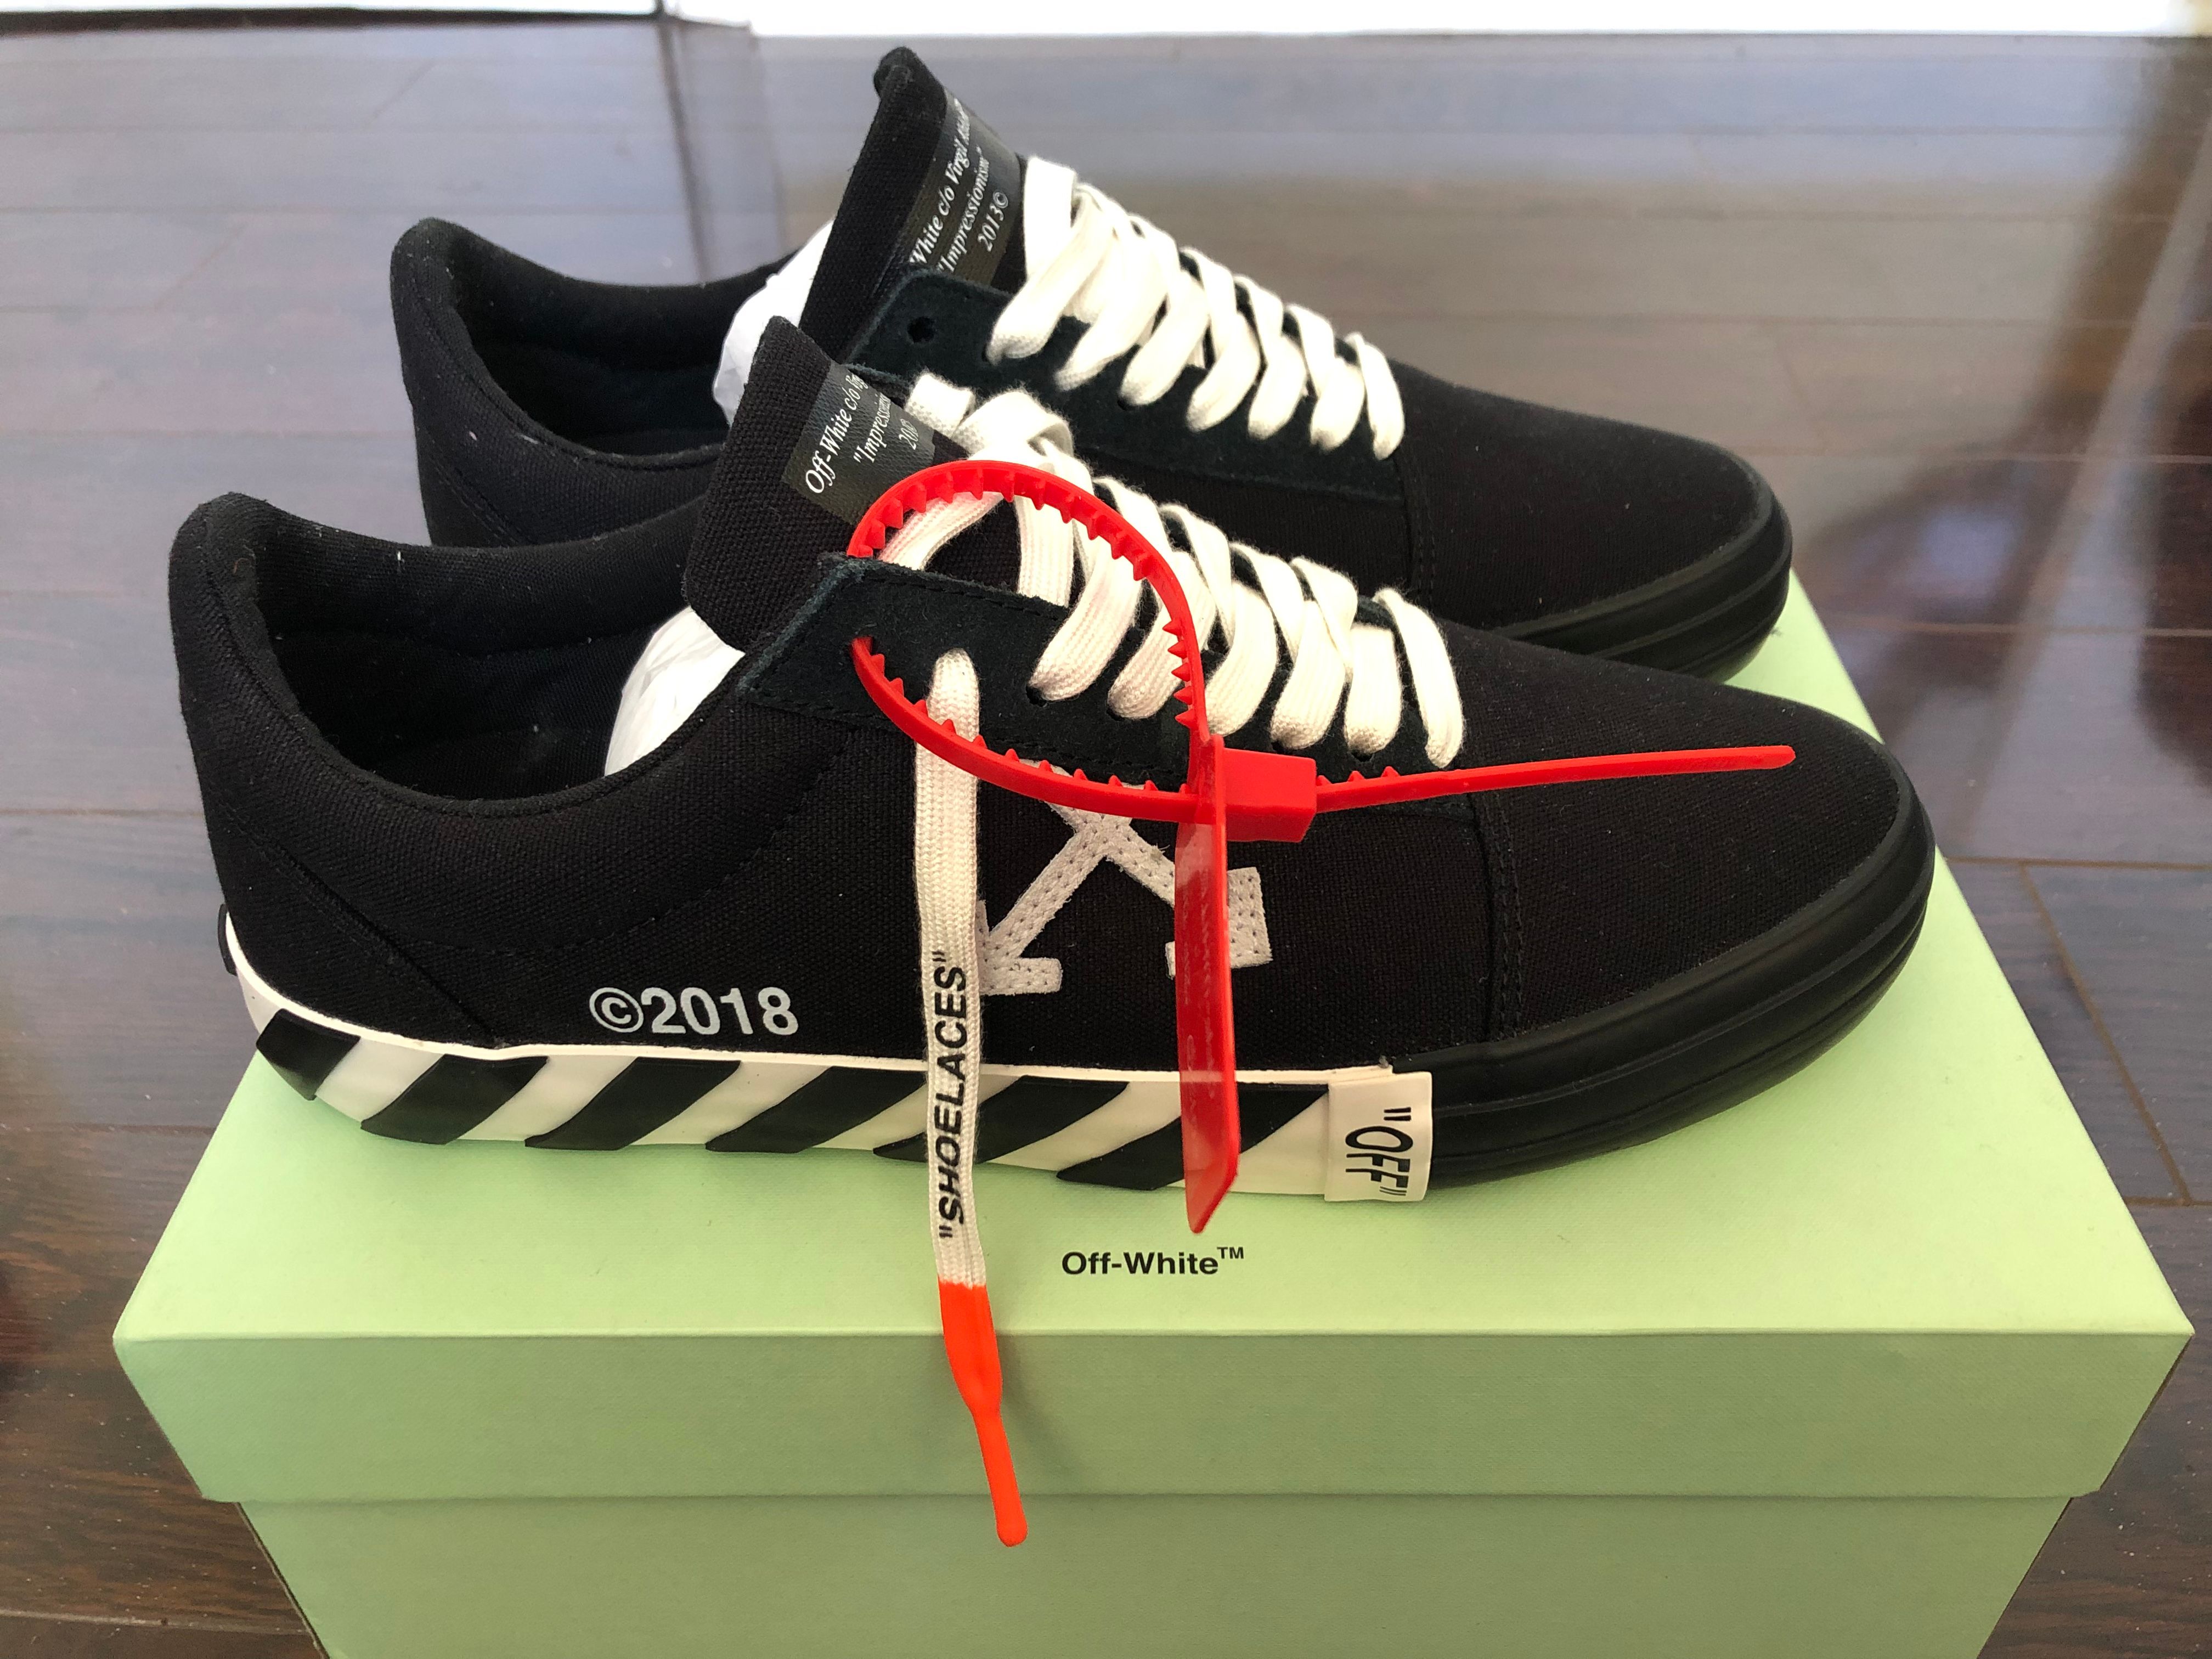 Off-White ⭐️⭐️ SALE! DEADSTOCK Brand New Off-White Vulc Low-Top Sneakers Size US 9 / EU 42 - 1 Preview